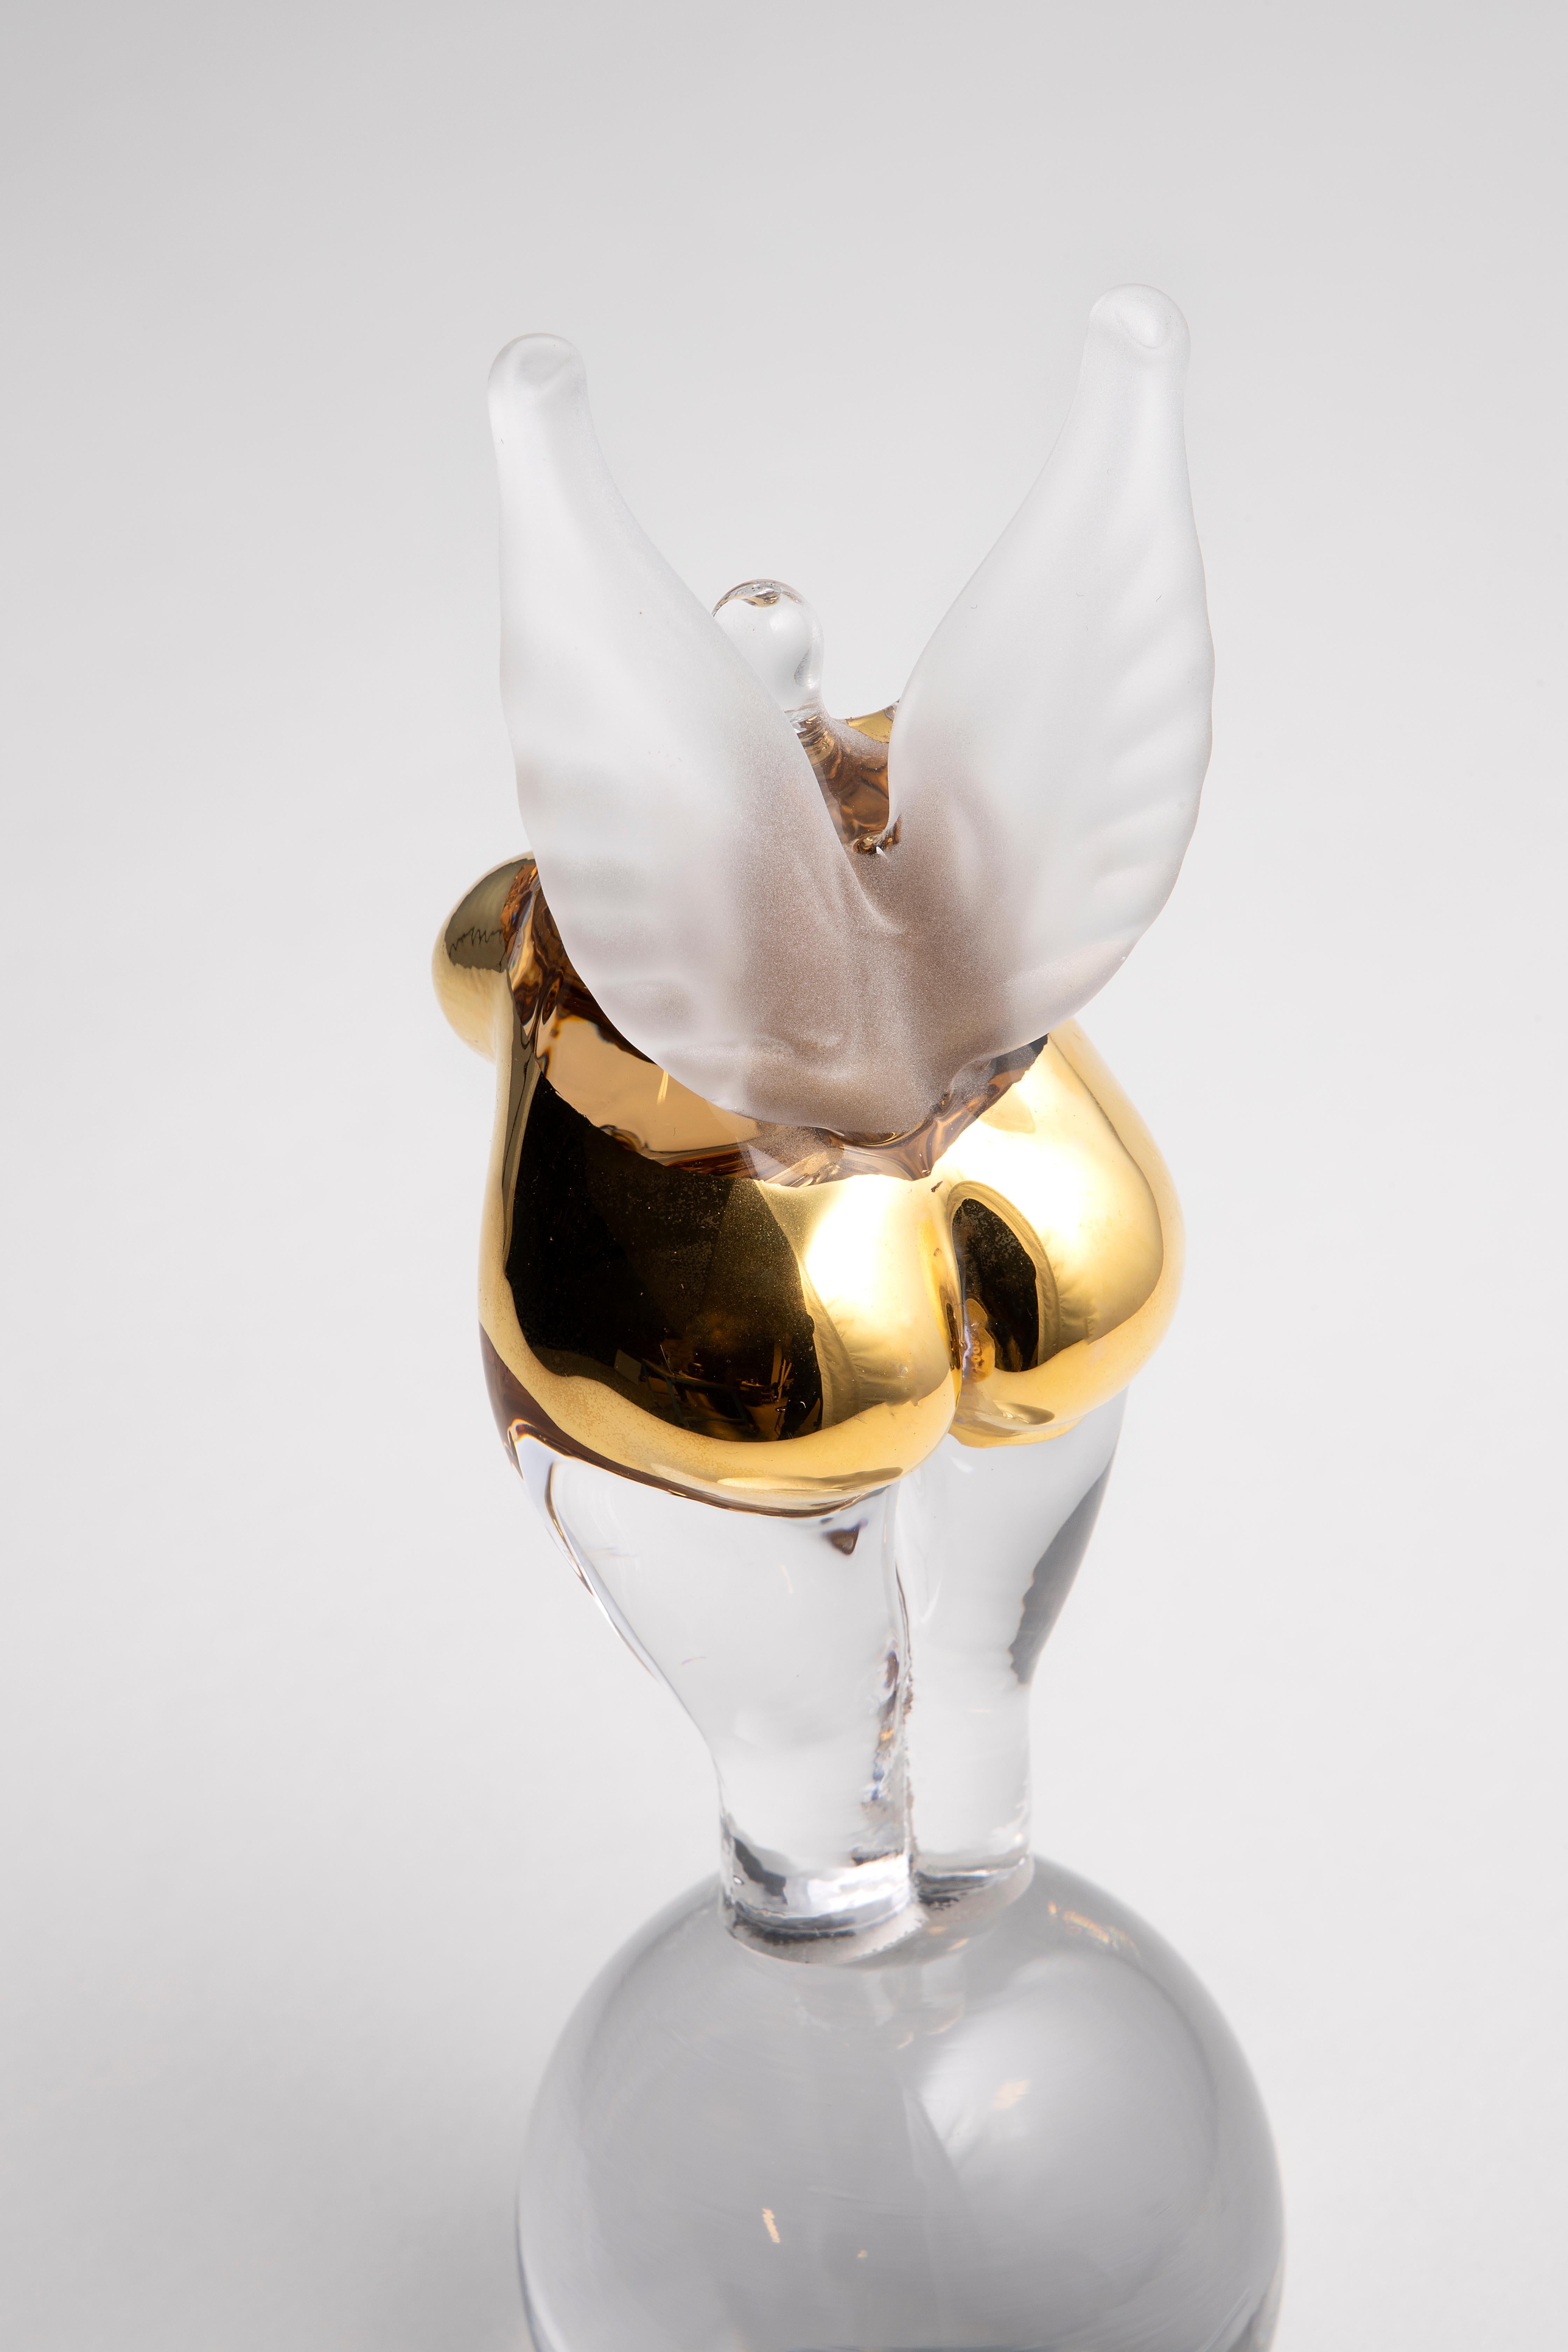 Golden Angel by Kjell Engman is inspired by the artist's own bathing ladies, whose shape is influenced by the curvaceous gospel singers he saw performing during a visit to the US. The object from Kosta Boda Artist Collection is handmade at Kosta